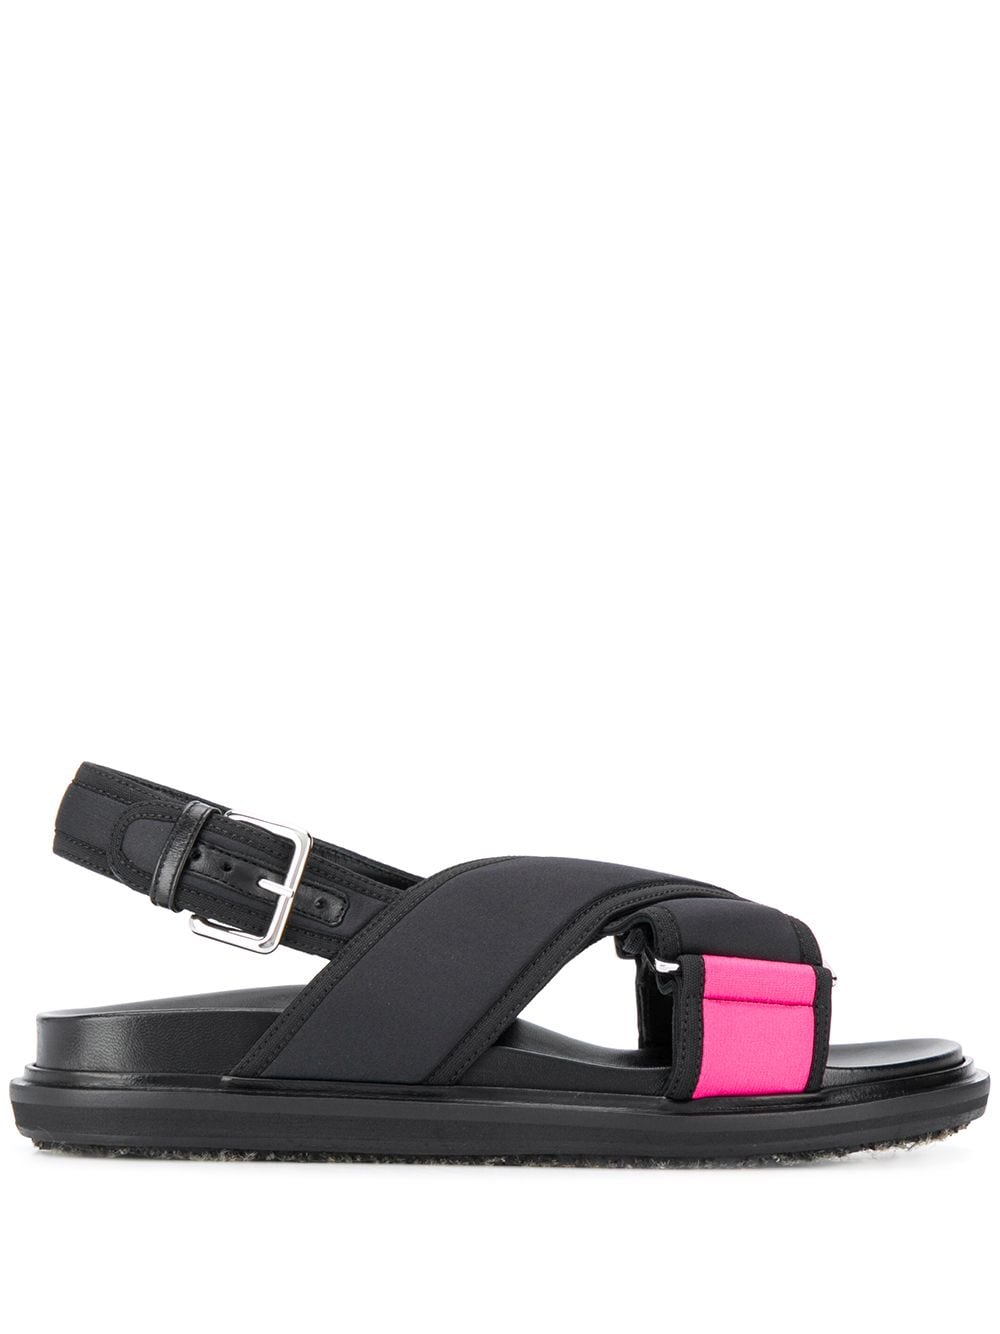 Marni Neon Panelled Flat Sandals In Black